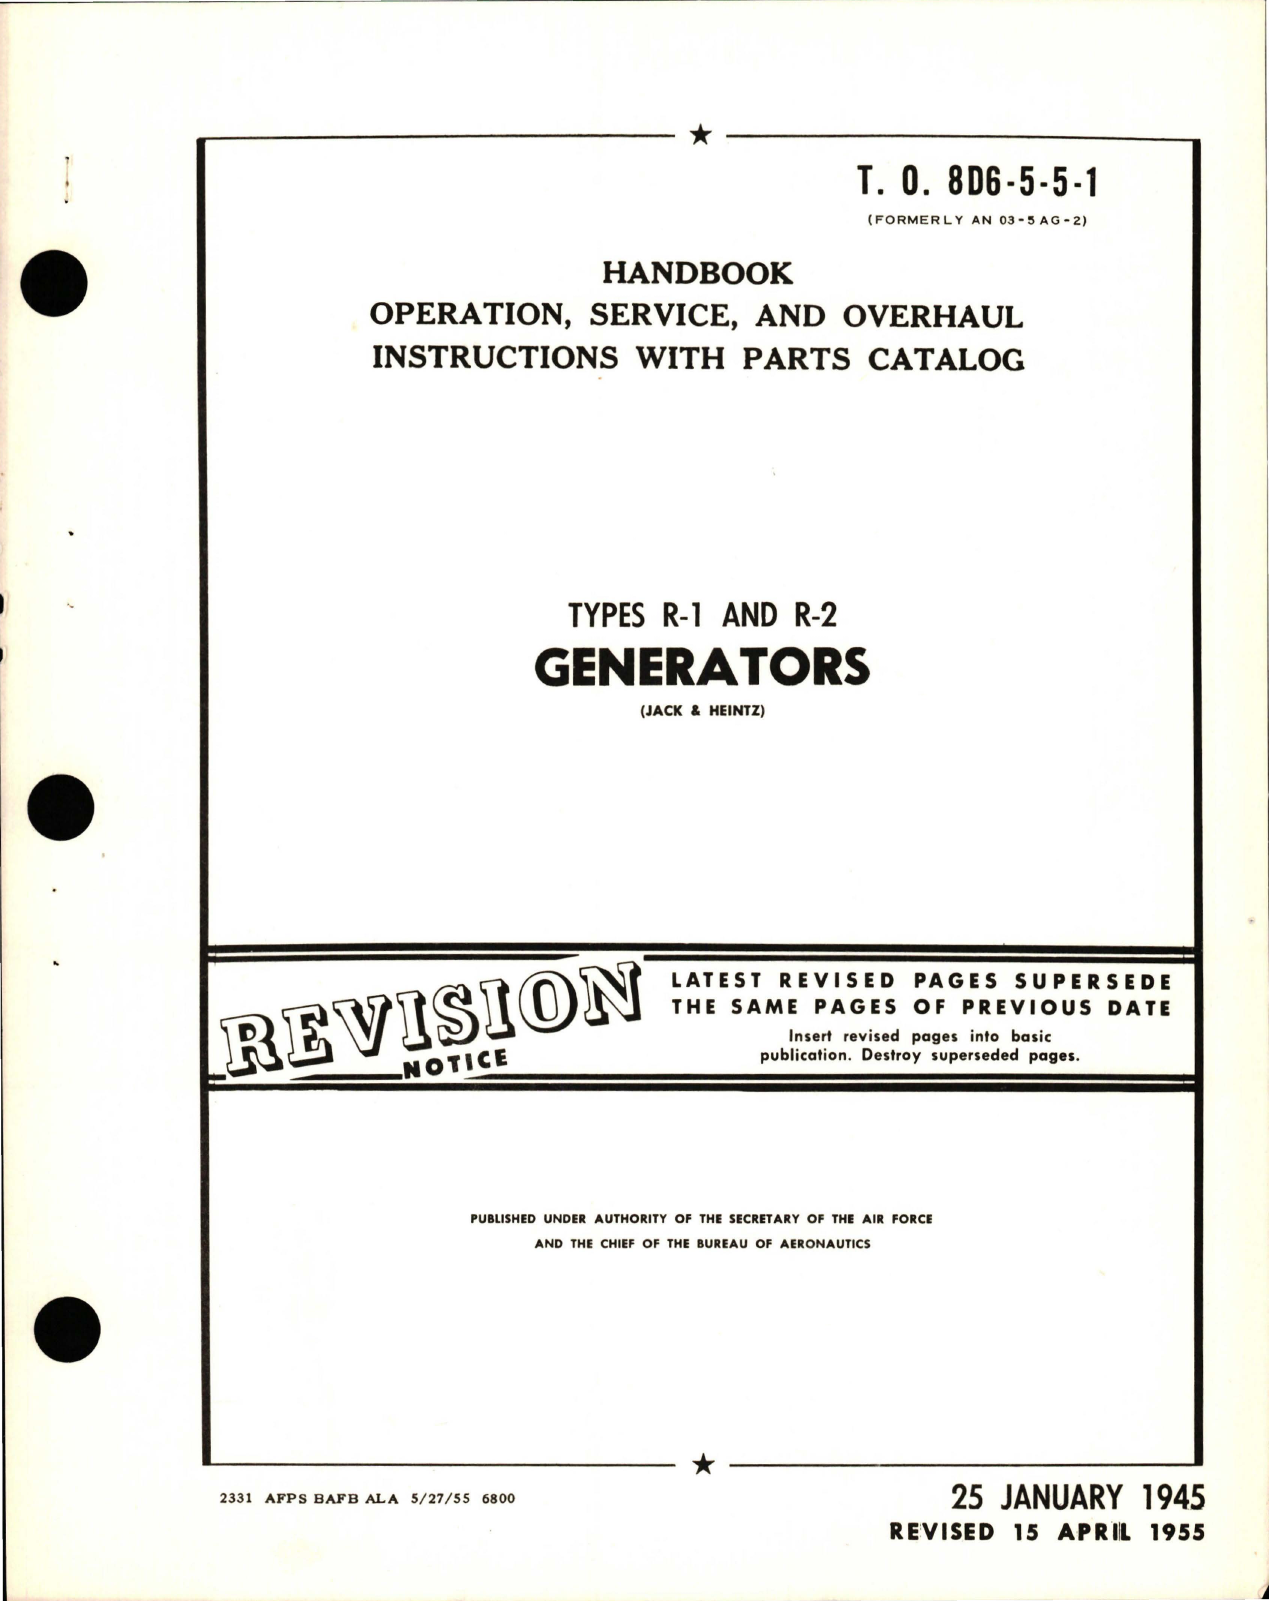 Sample page 1 from AirCorps Library document: Operation, Service, Overhaul Instructions with Parts Catalog for Generators, Types R-1 and R-2